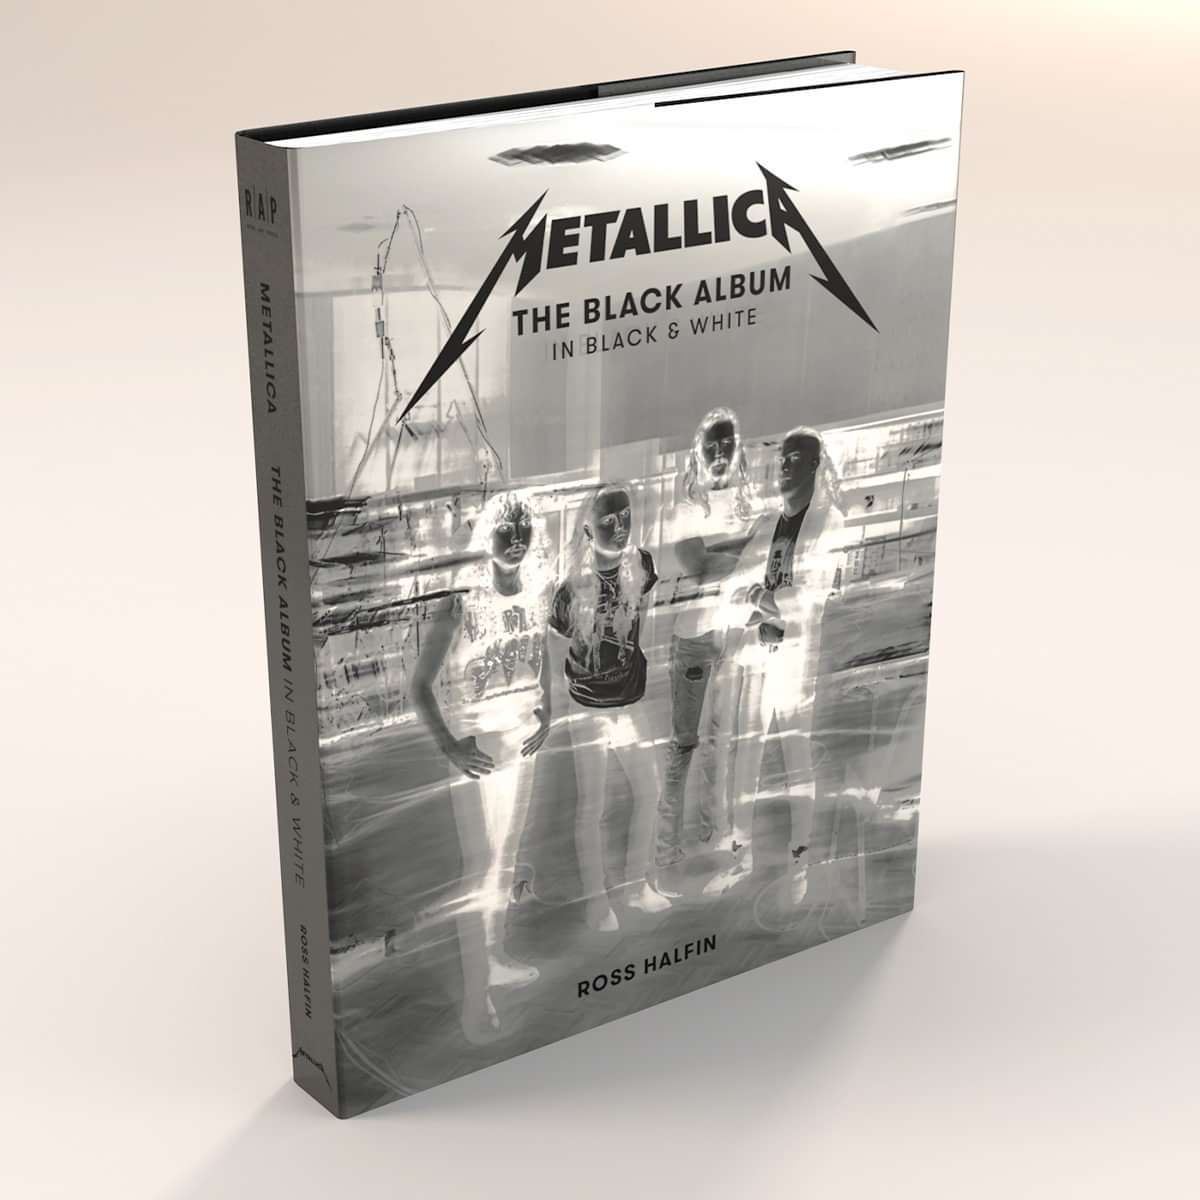 Metallica announce special pressings of studio albums on limited